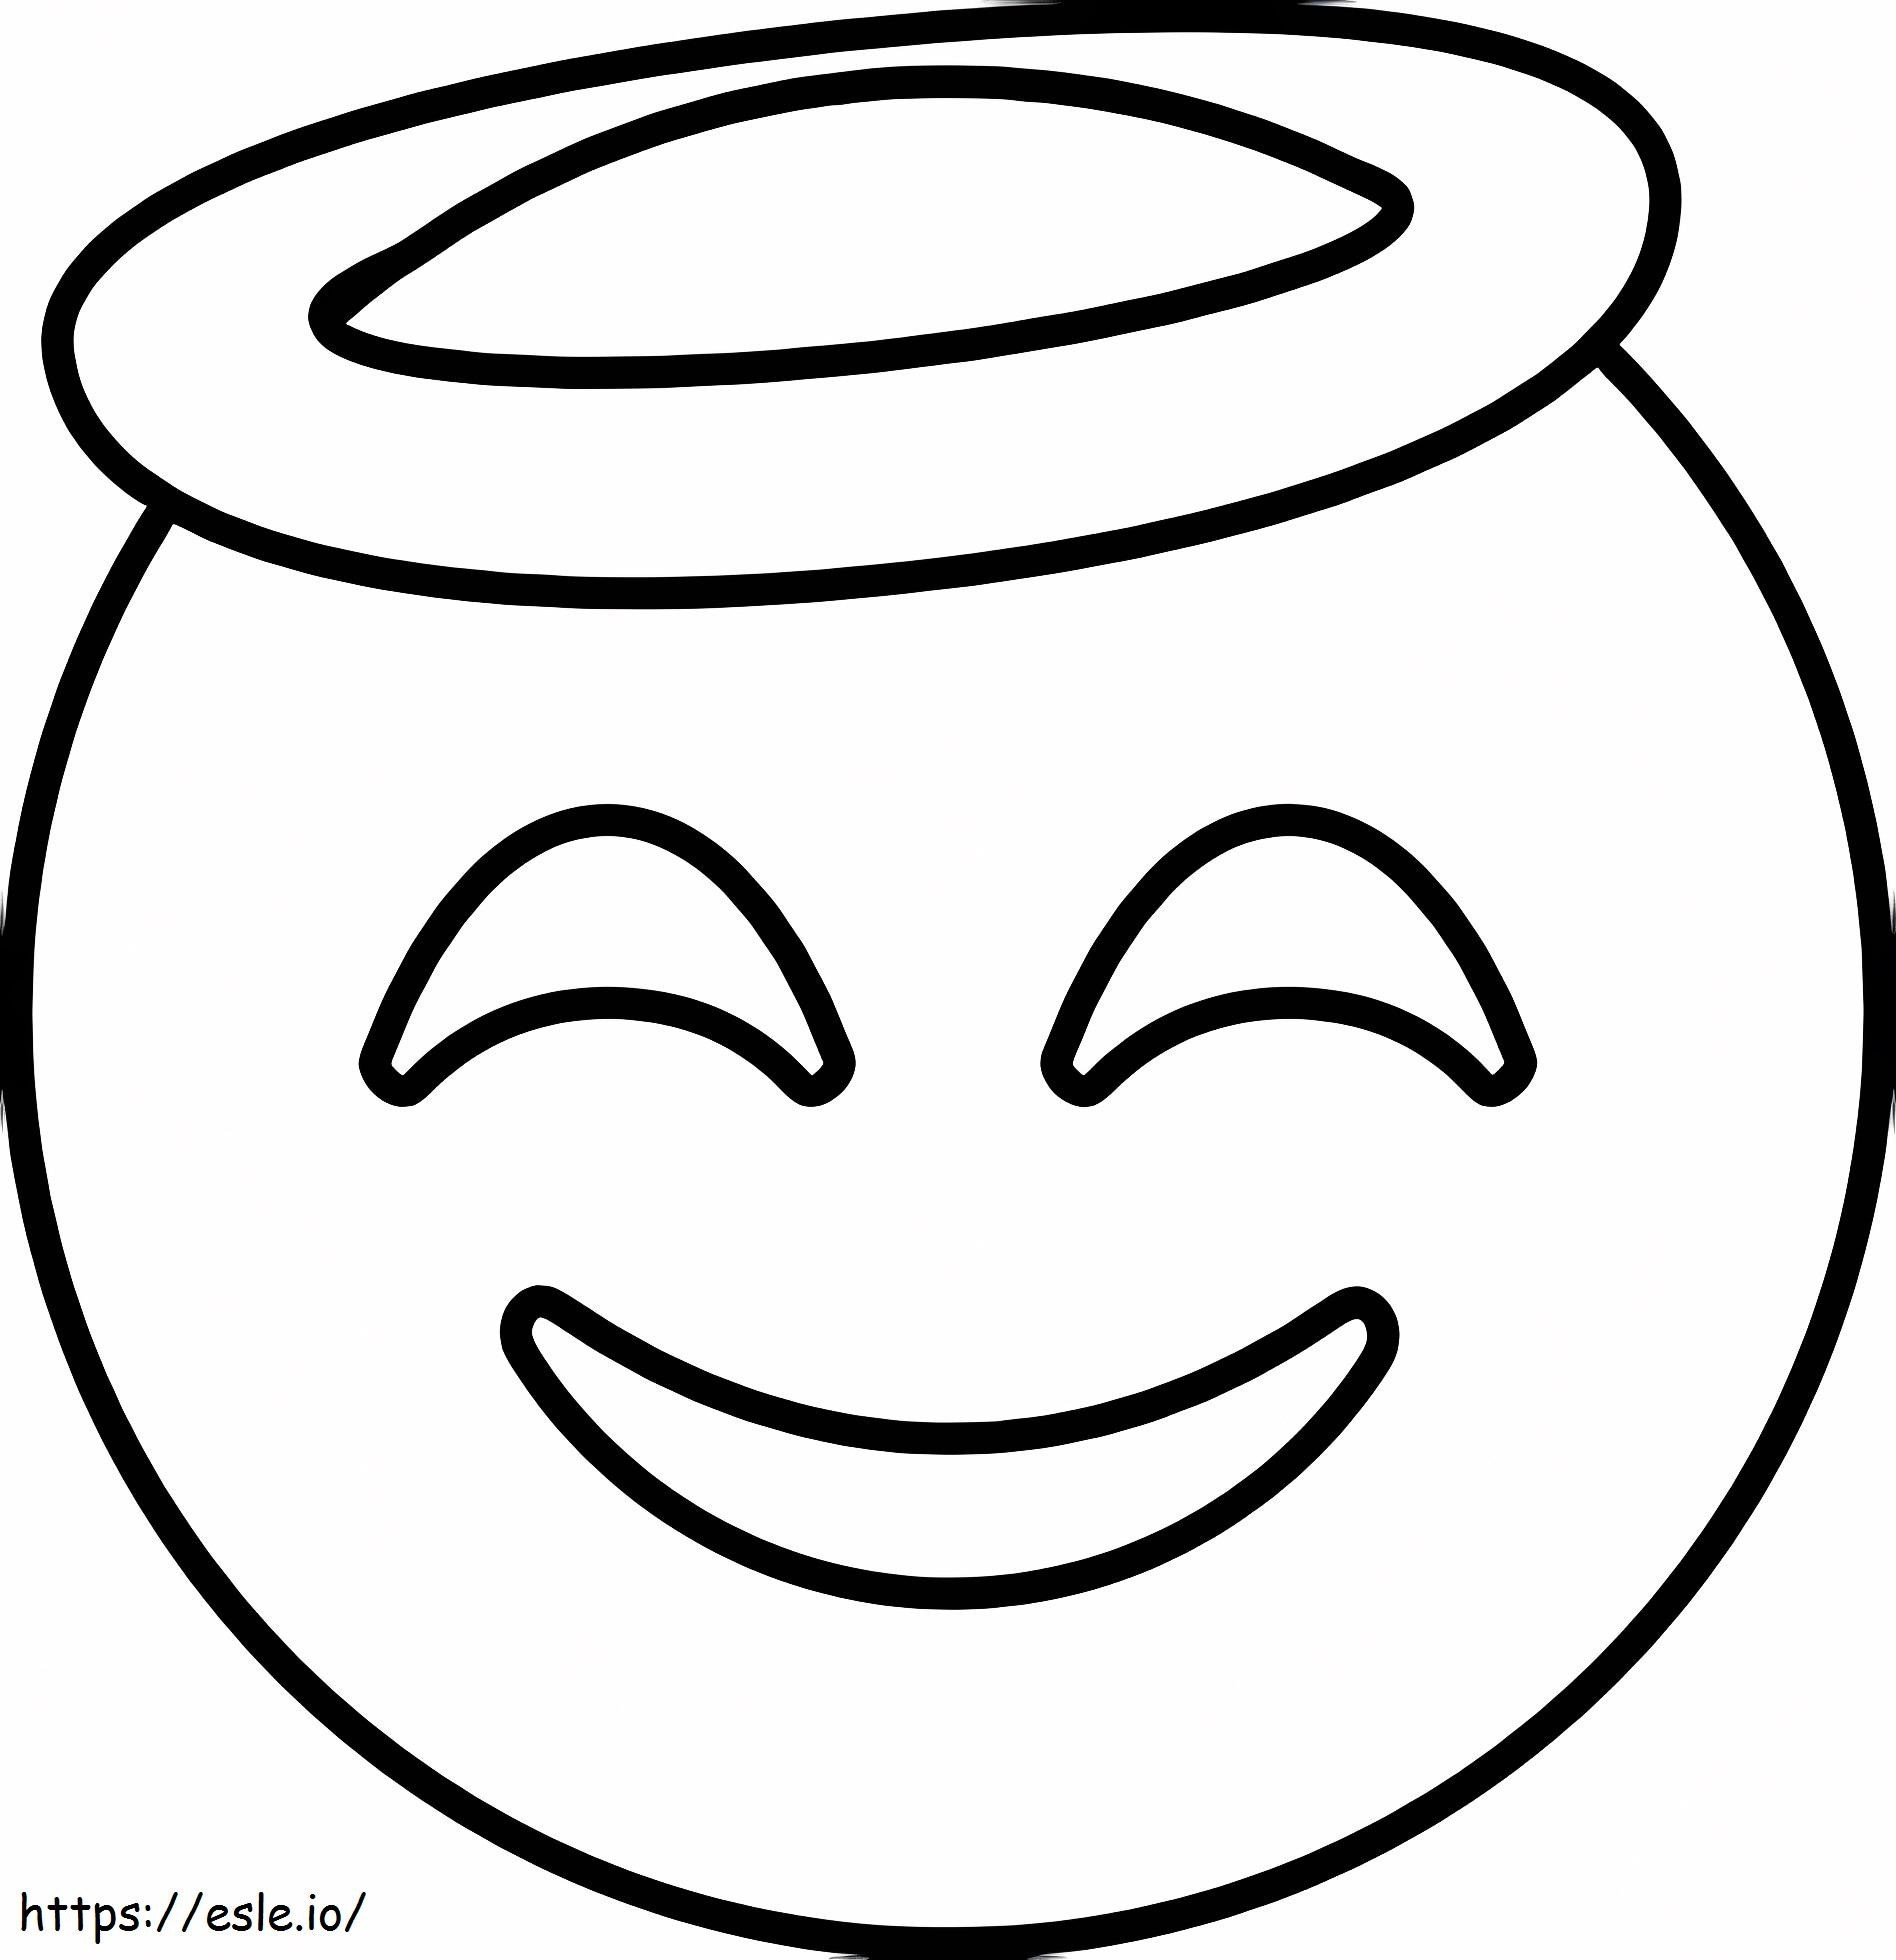 Smiling Face With Halo coloring page